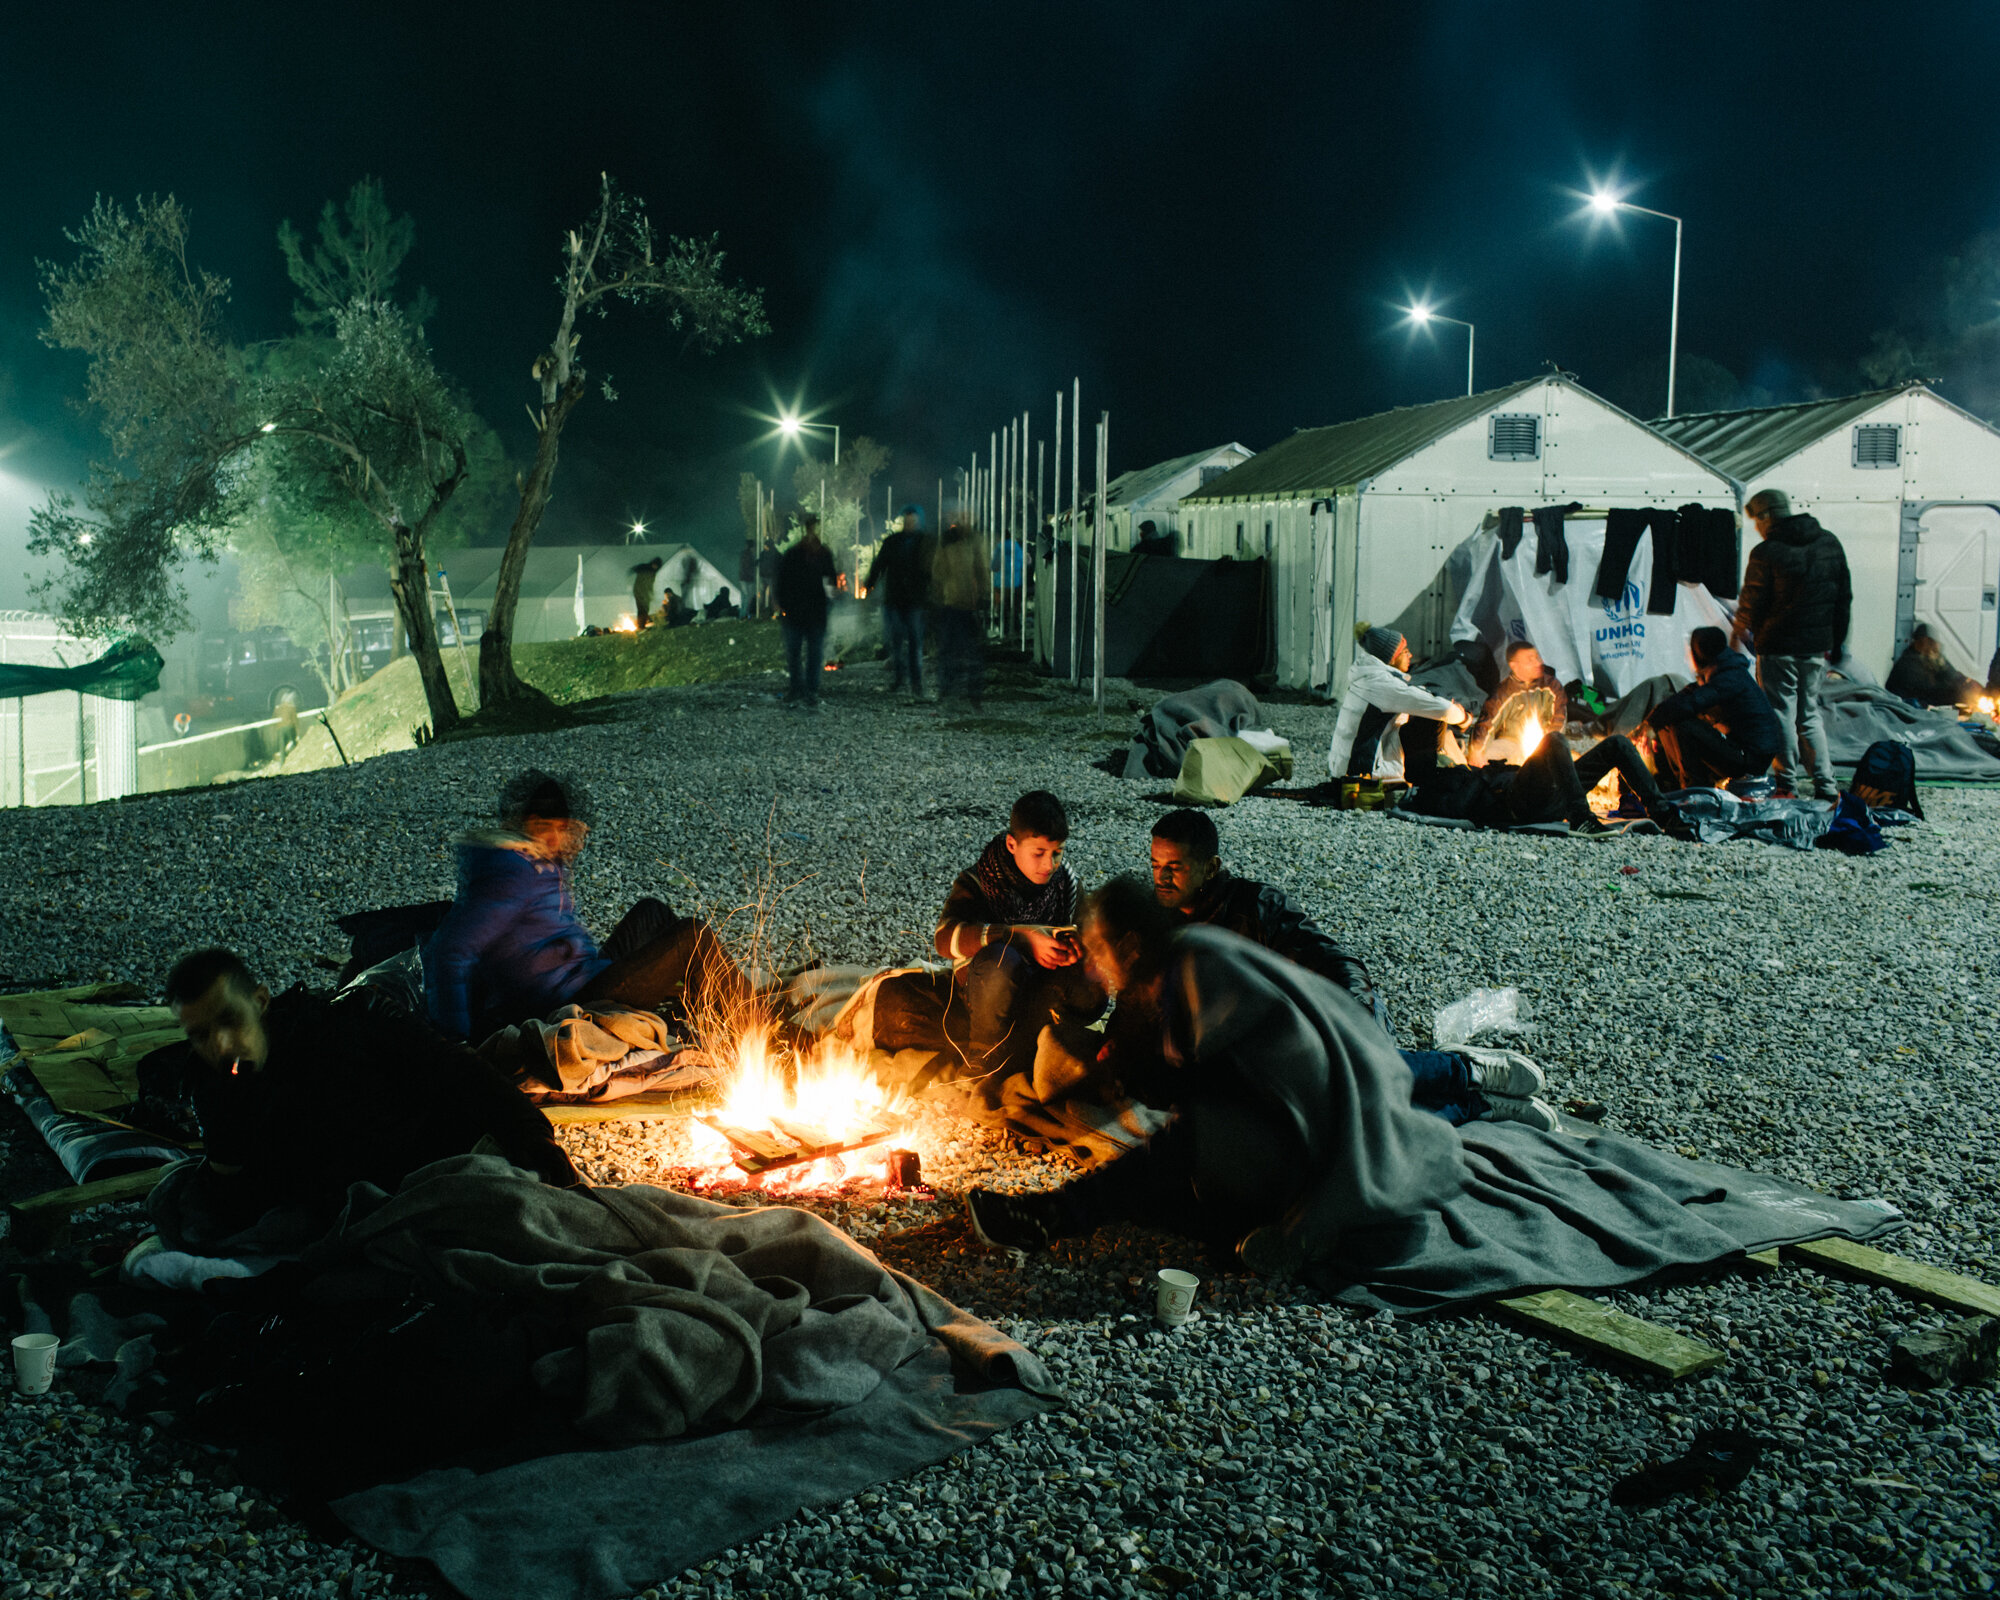  Through the freezing rain, refugees wait through the night where they can, harboring fires for warmth. 